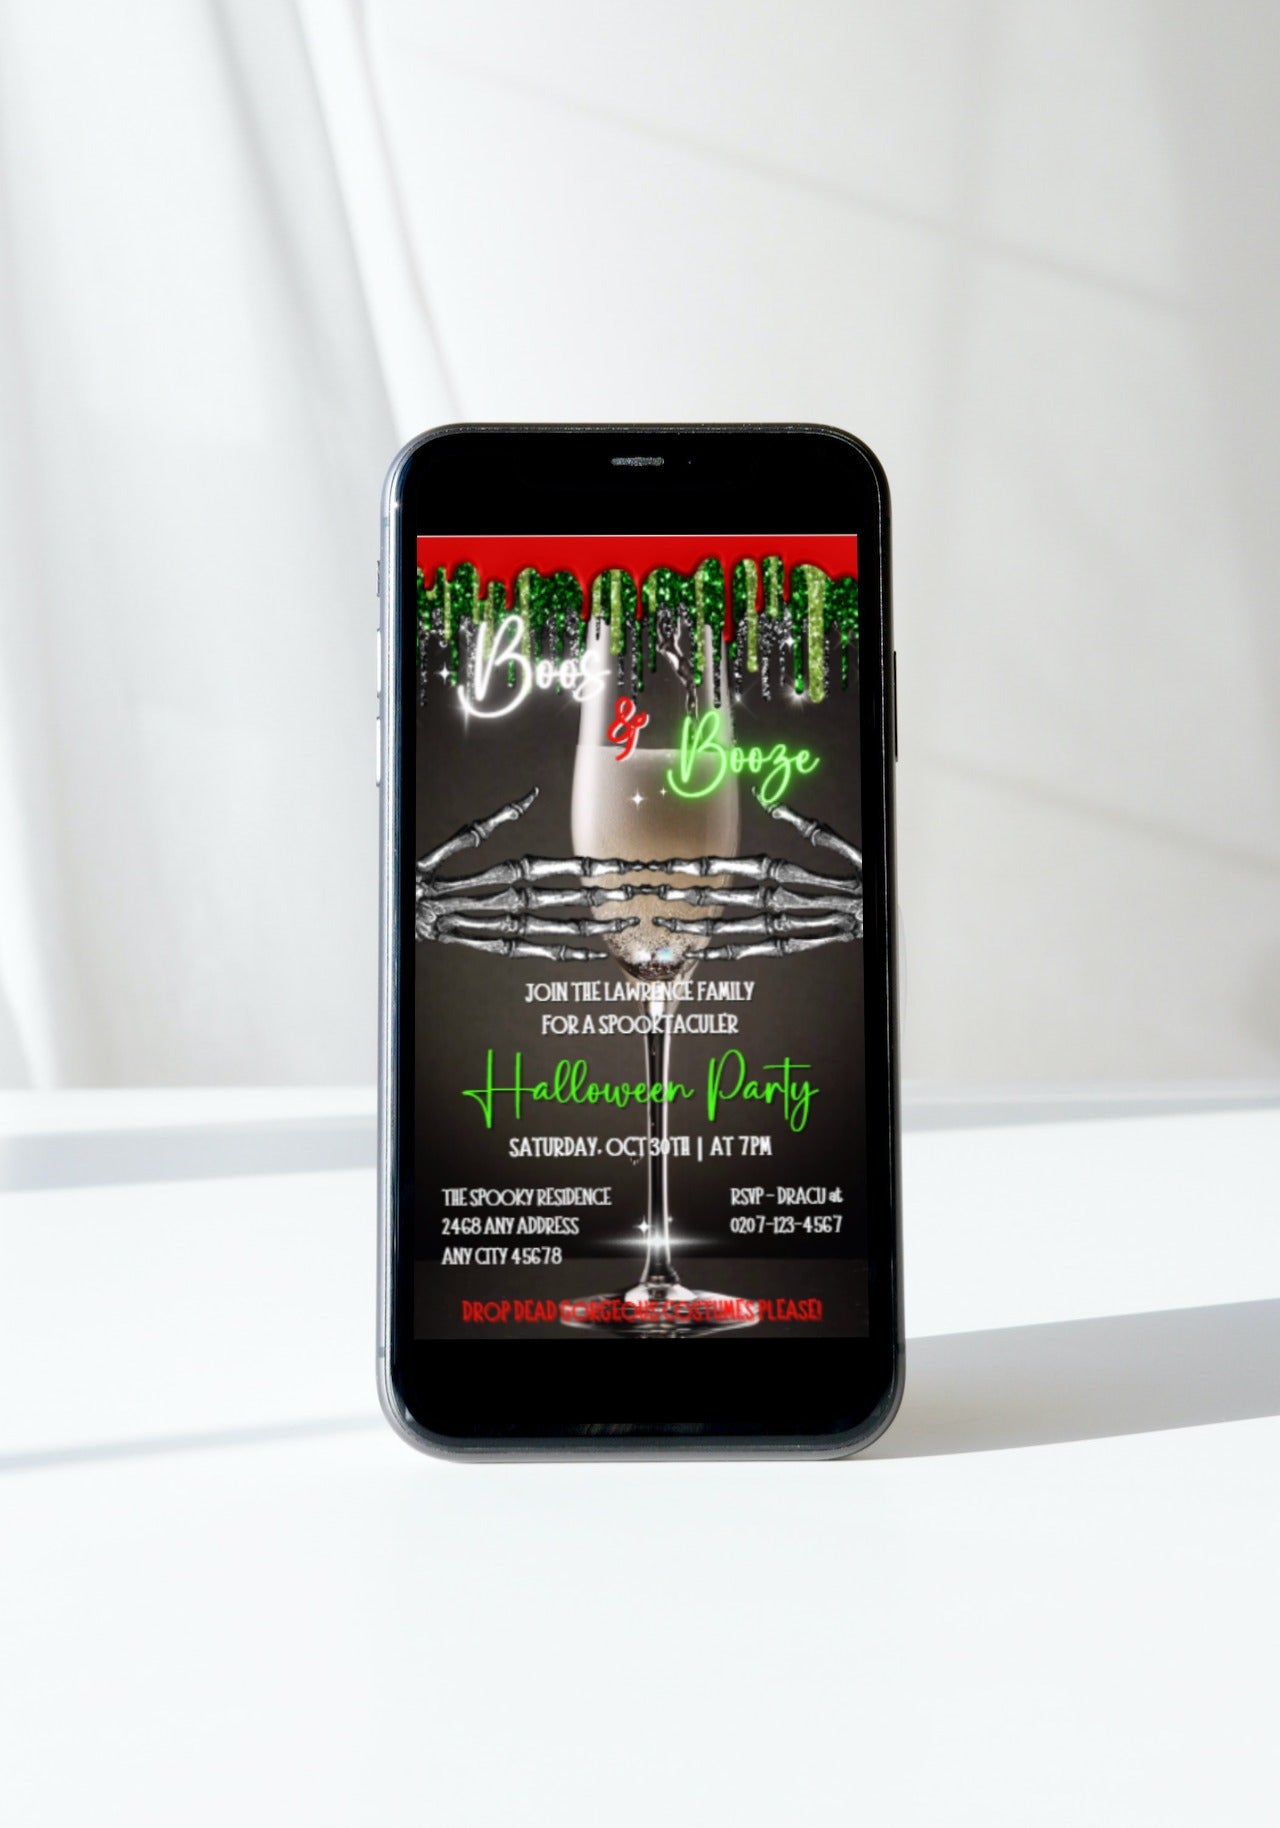 Creepy Skeleton Hands Champagne Halloween Party Video Invite displayed on a cell phone screen, featuring a spooky digital invitation with skeleton hands holding a drink.